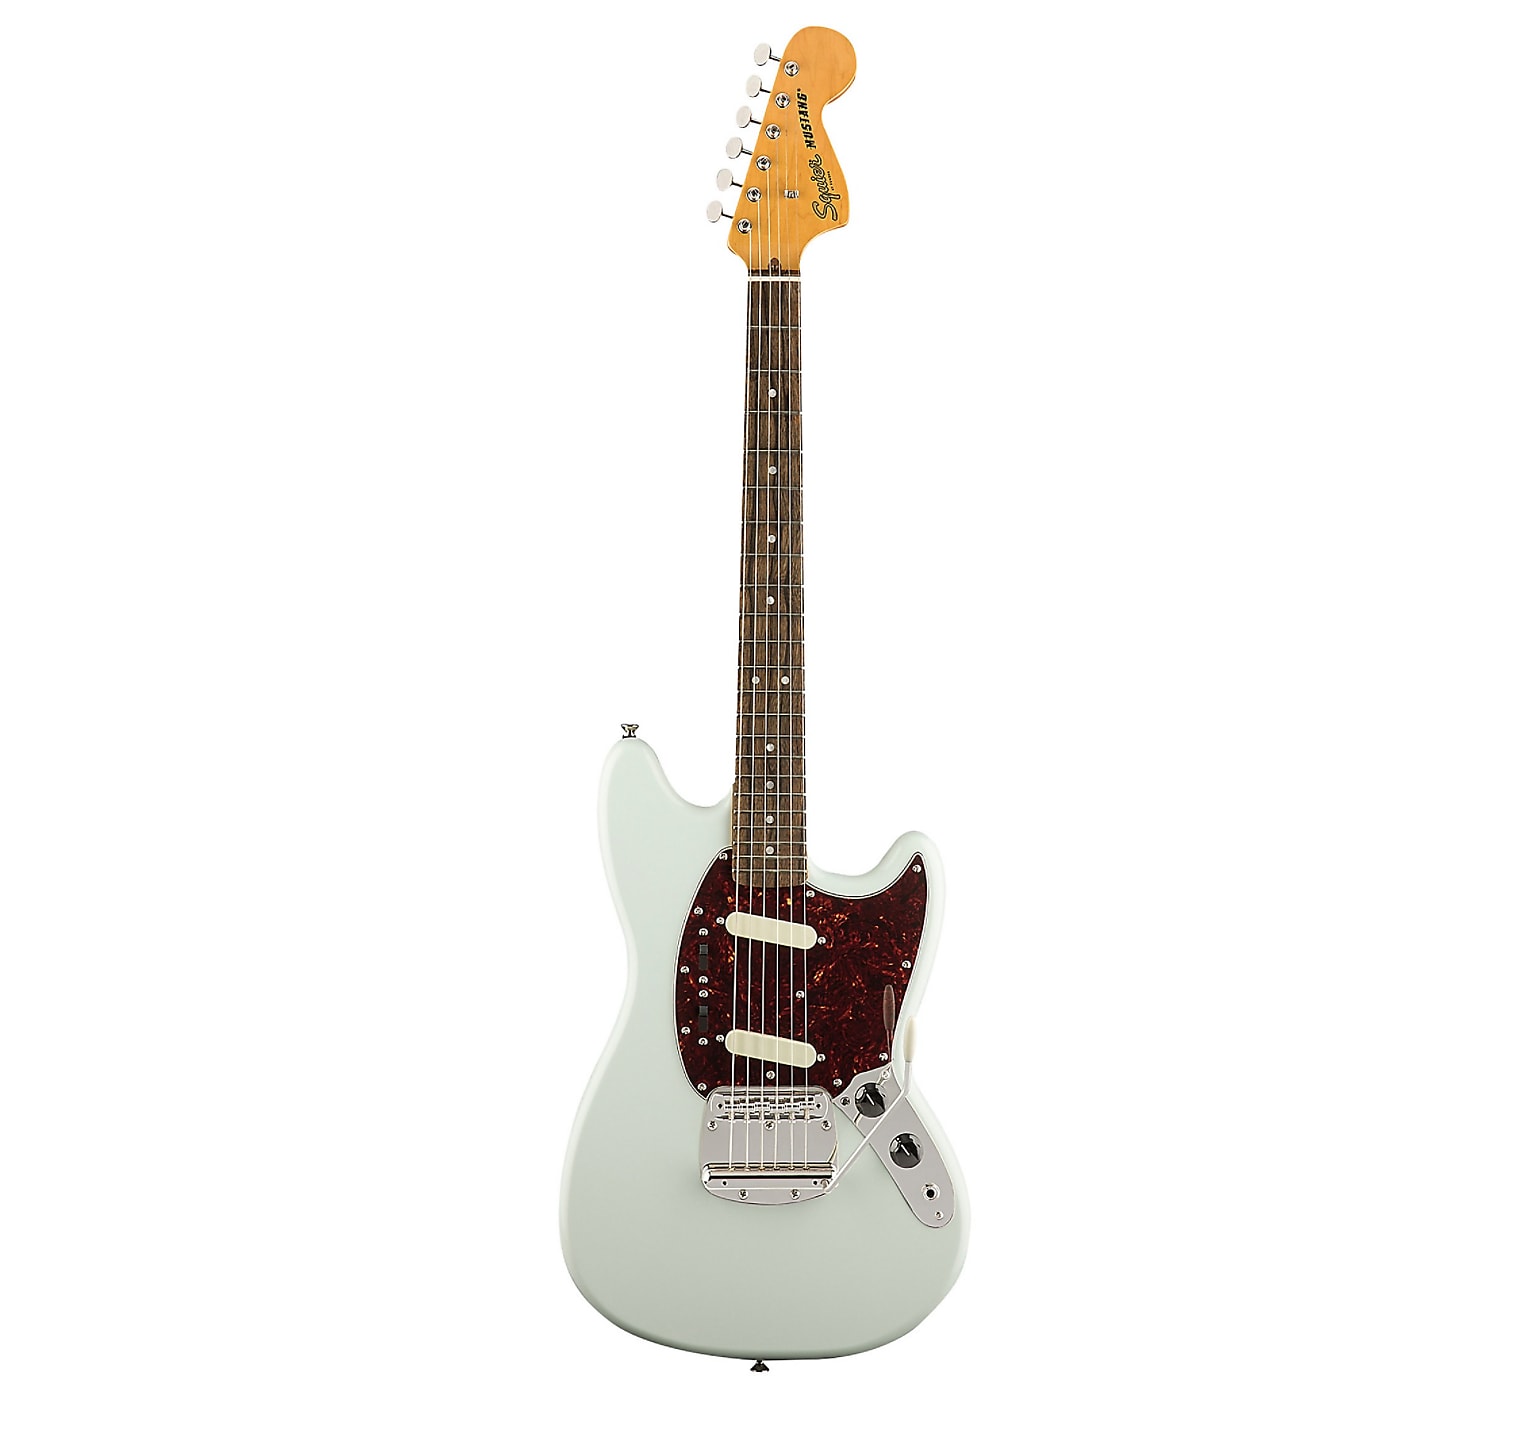 Squier Vintage Modified Mustang Electric Guitar | Reverb